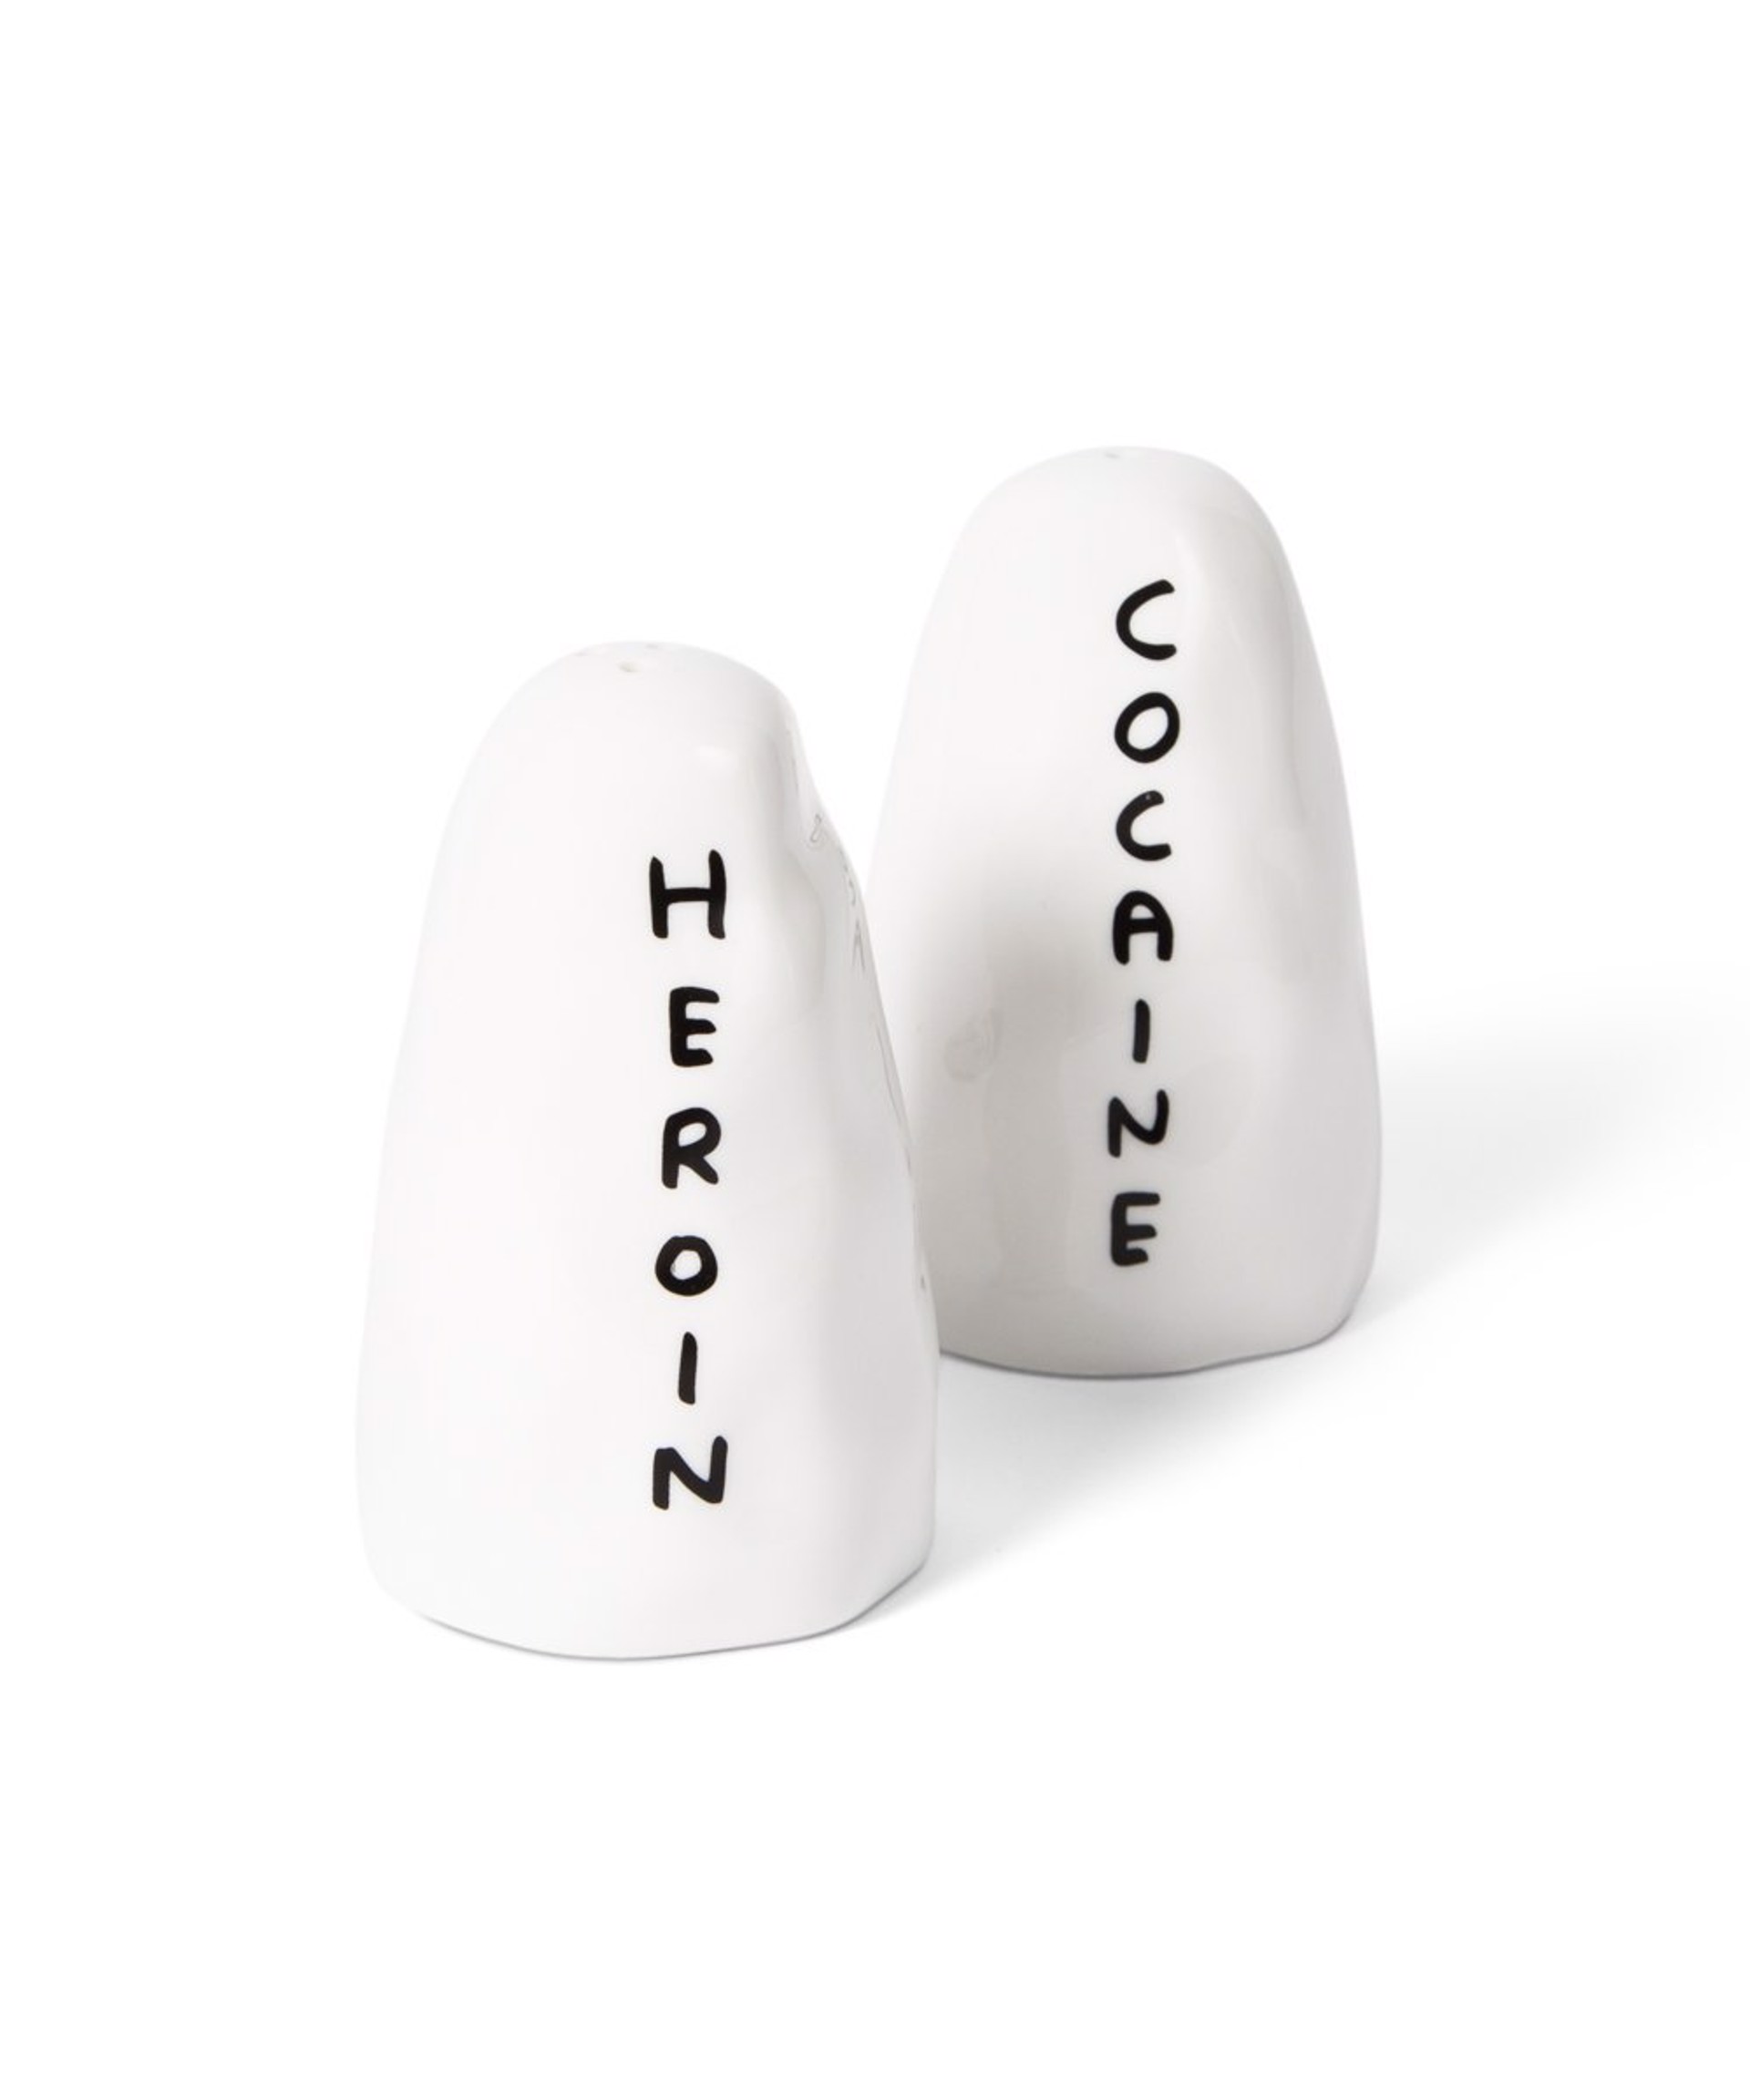 Heroin & Cocaine Salt and Pepper Shakers by David Shrigley